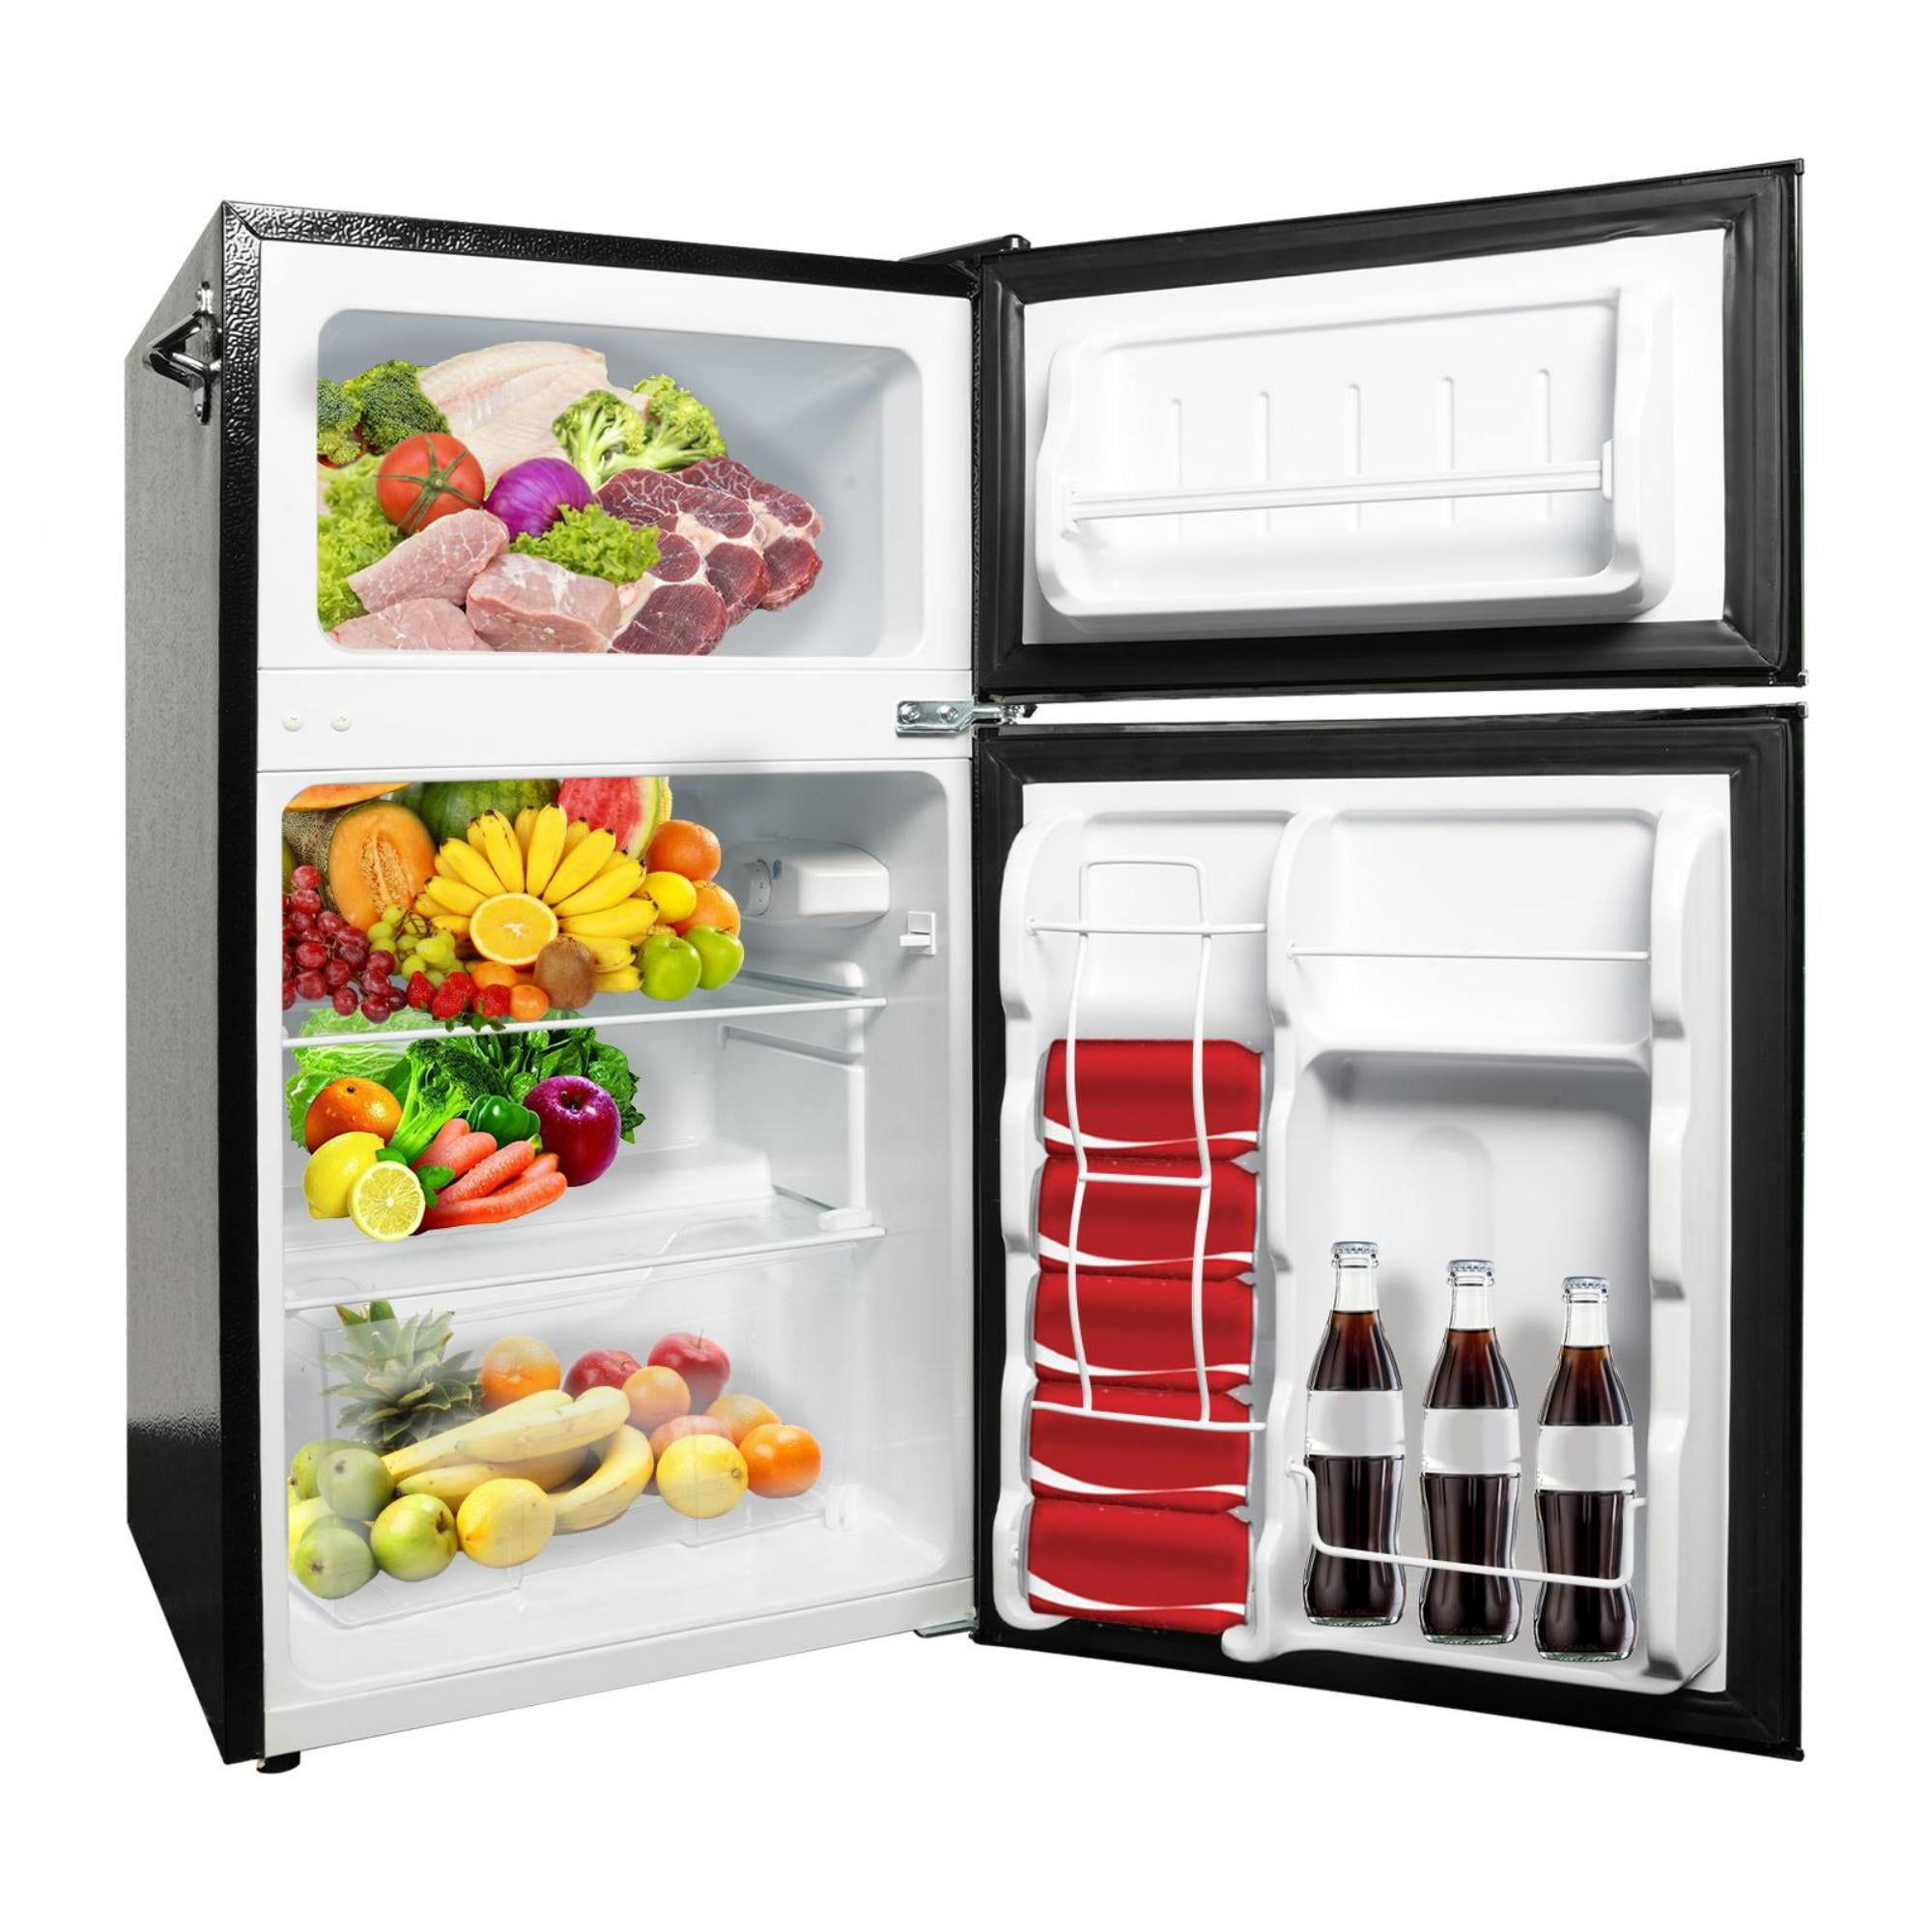  LDAILY Compact Refrigerator, 2.4 cu ft Mini Fridge with  Adjustable Temperature 32℉ to 50℉, Auto Defrost, Reversible Door, Removable  Glass Shelves, Small Fridge for Dorm, Garage, Camper, Basement or Office  (White) 